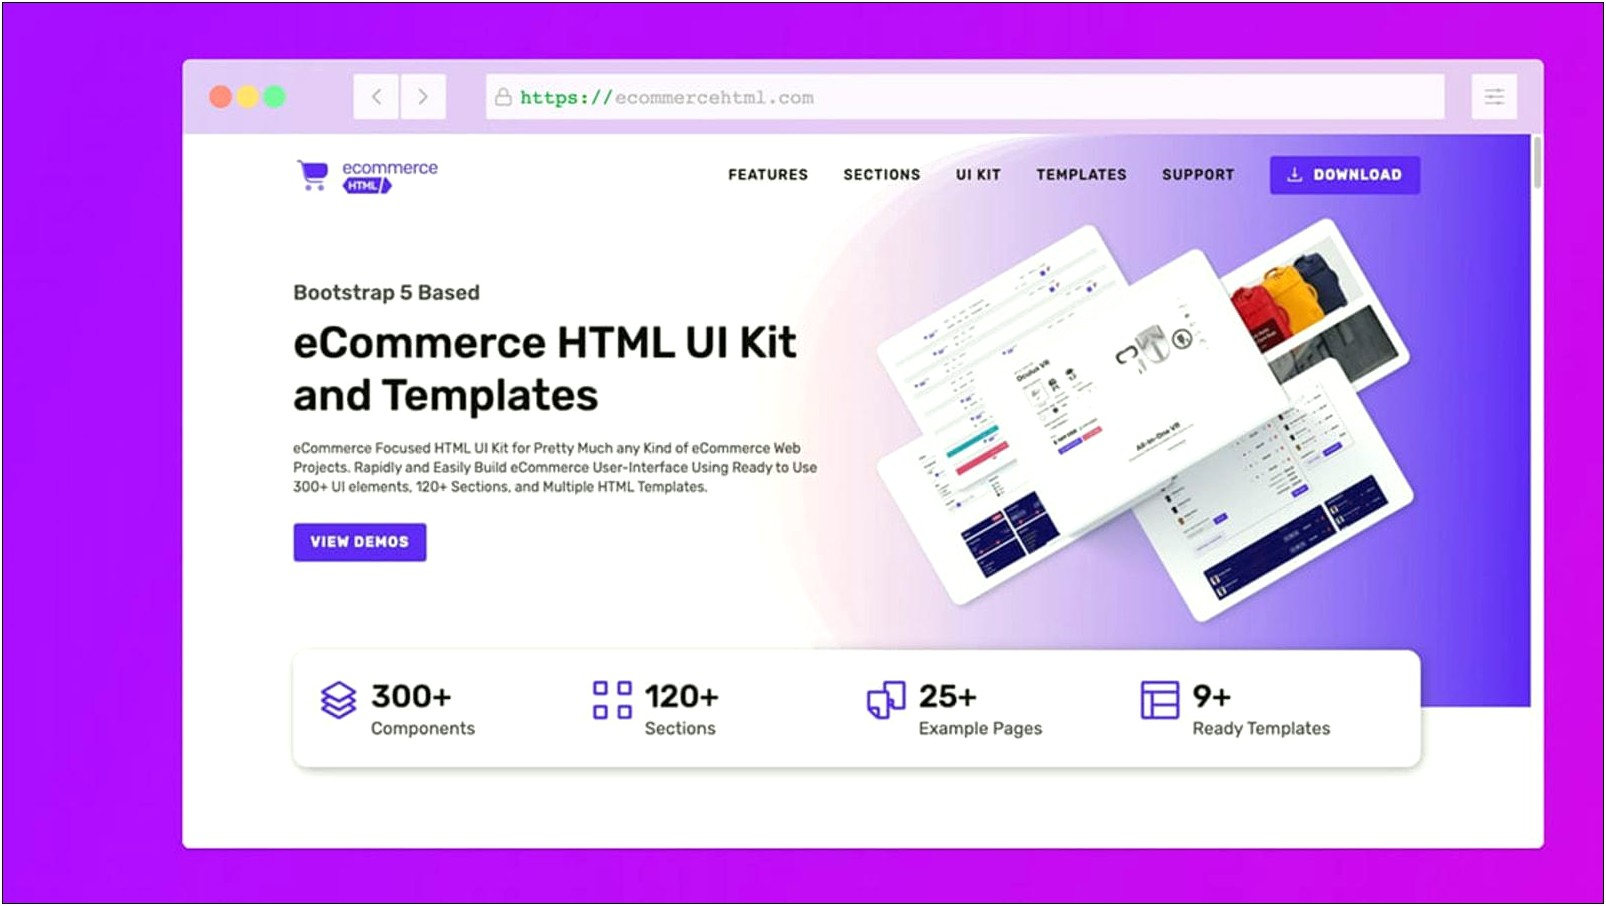 bootstrap-ecommerce-html-template-free-download-templates-resume-designs-kz21d0d1y9